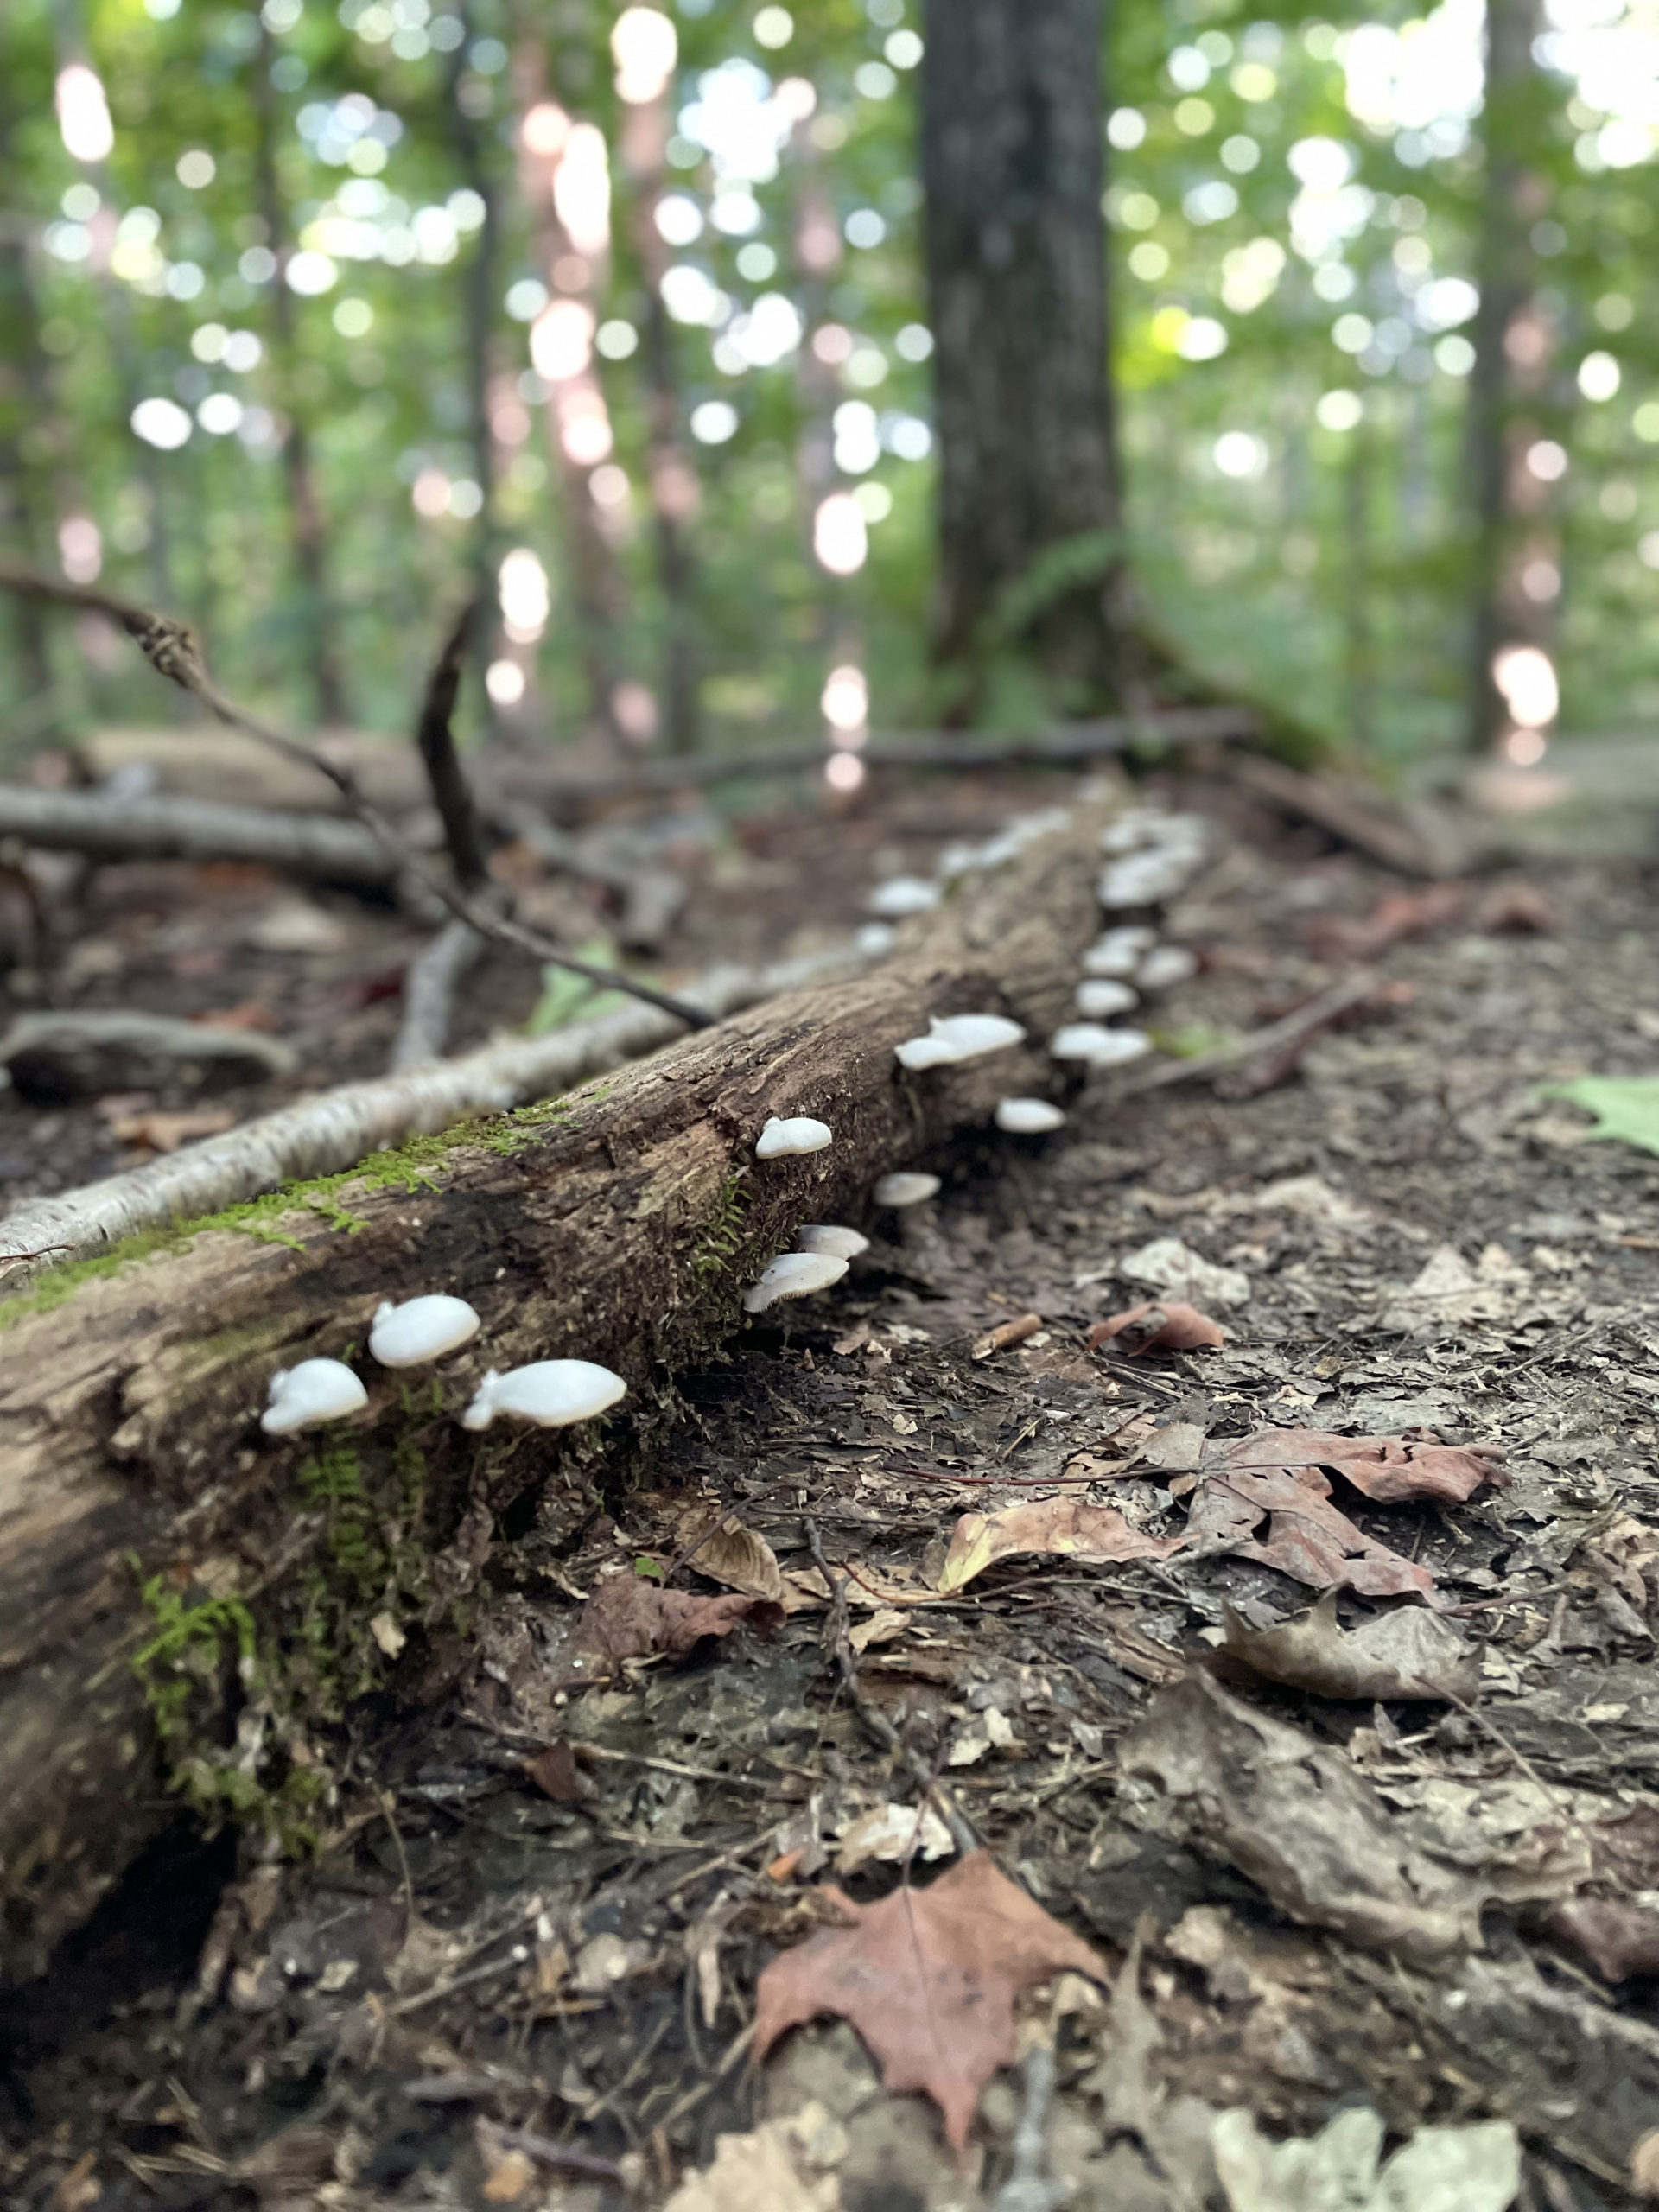 Mushrooms on a log, seen while hiking Camel's Hump in the Green Mountains, Vermont